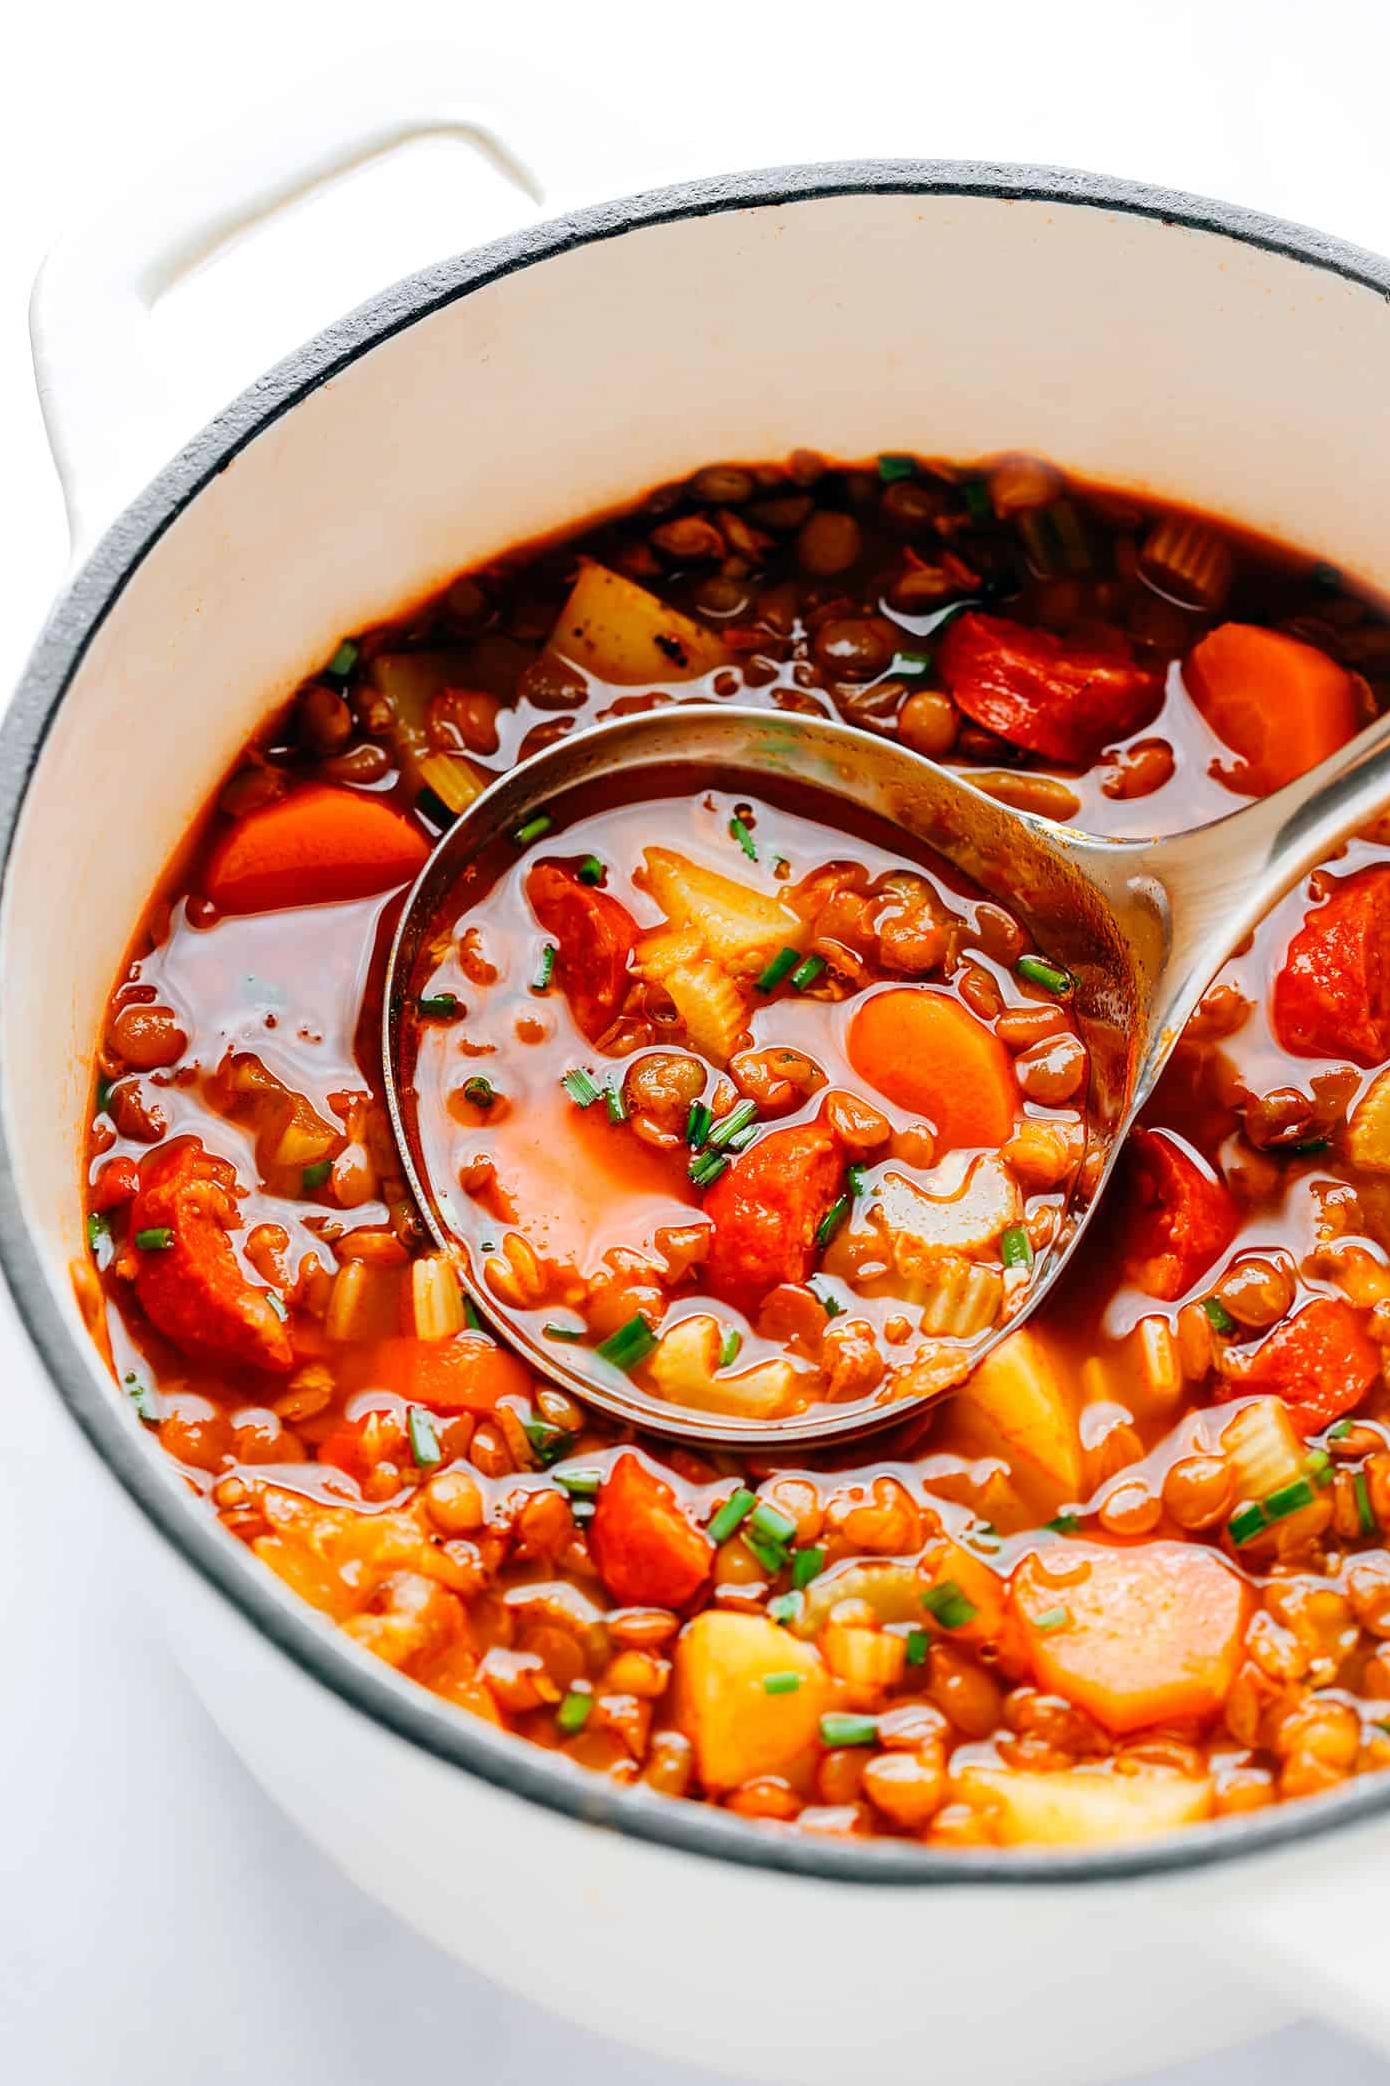  This homemade Basque chorizo and lentil soup will warm you up from the inside out.